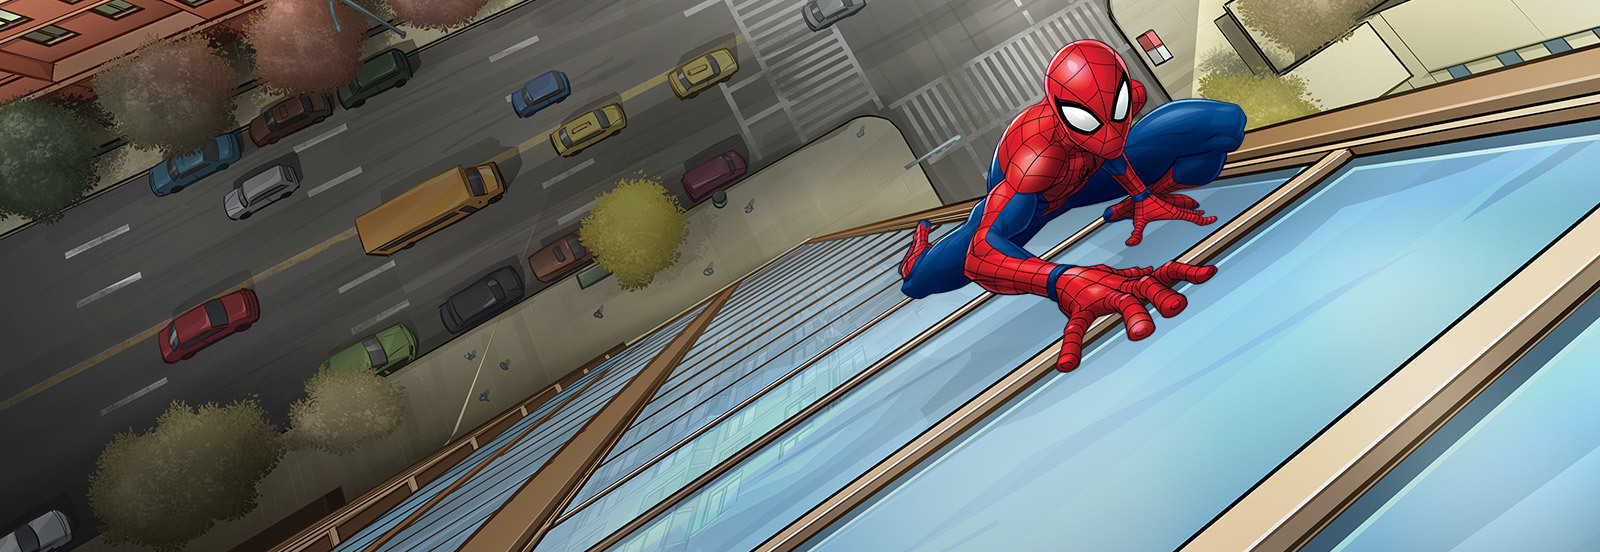 Marvel's Spider-Man Picture by Patrick Brown